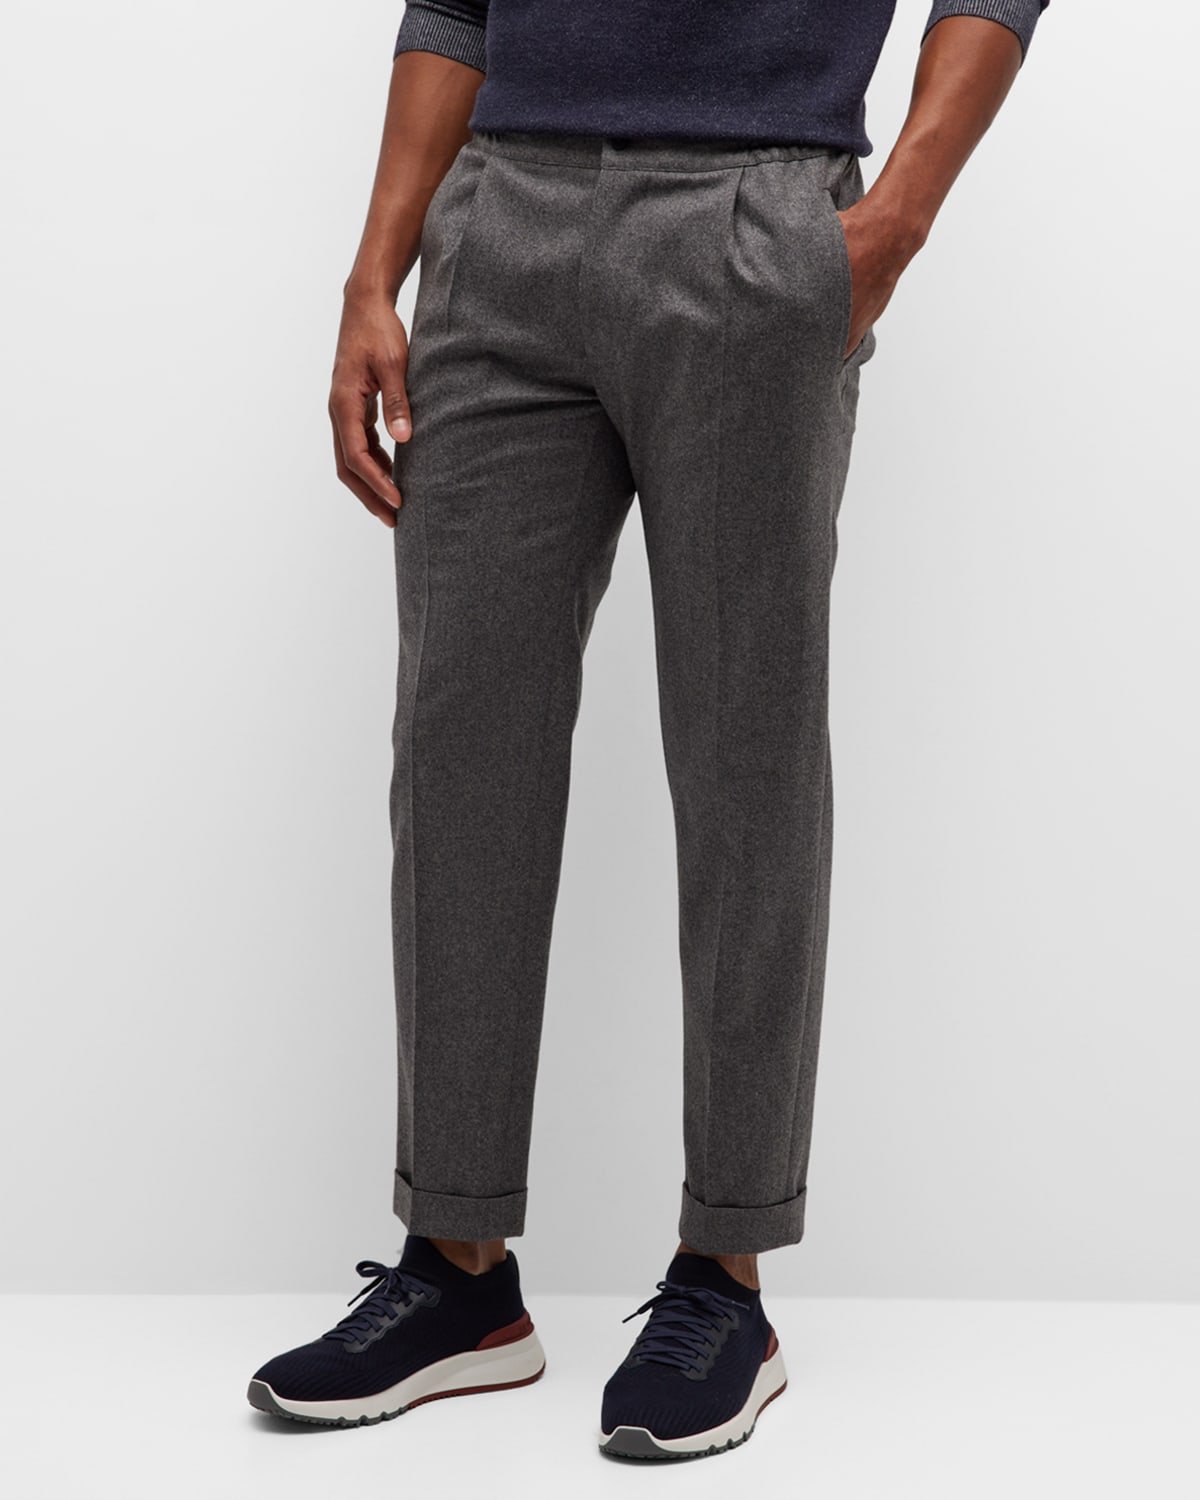 KNT Men's Wool Stretch Pleated Pants